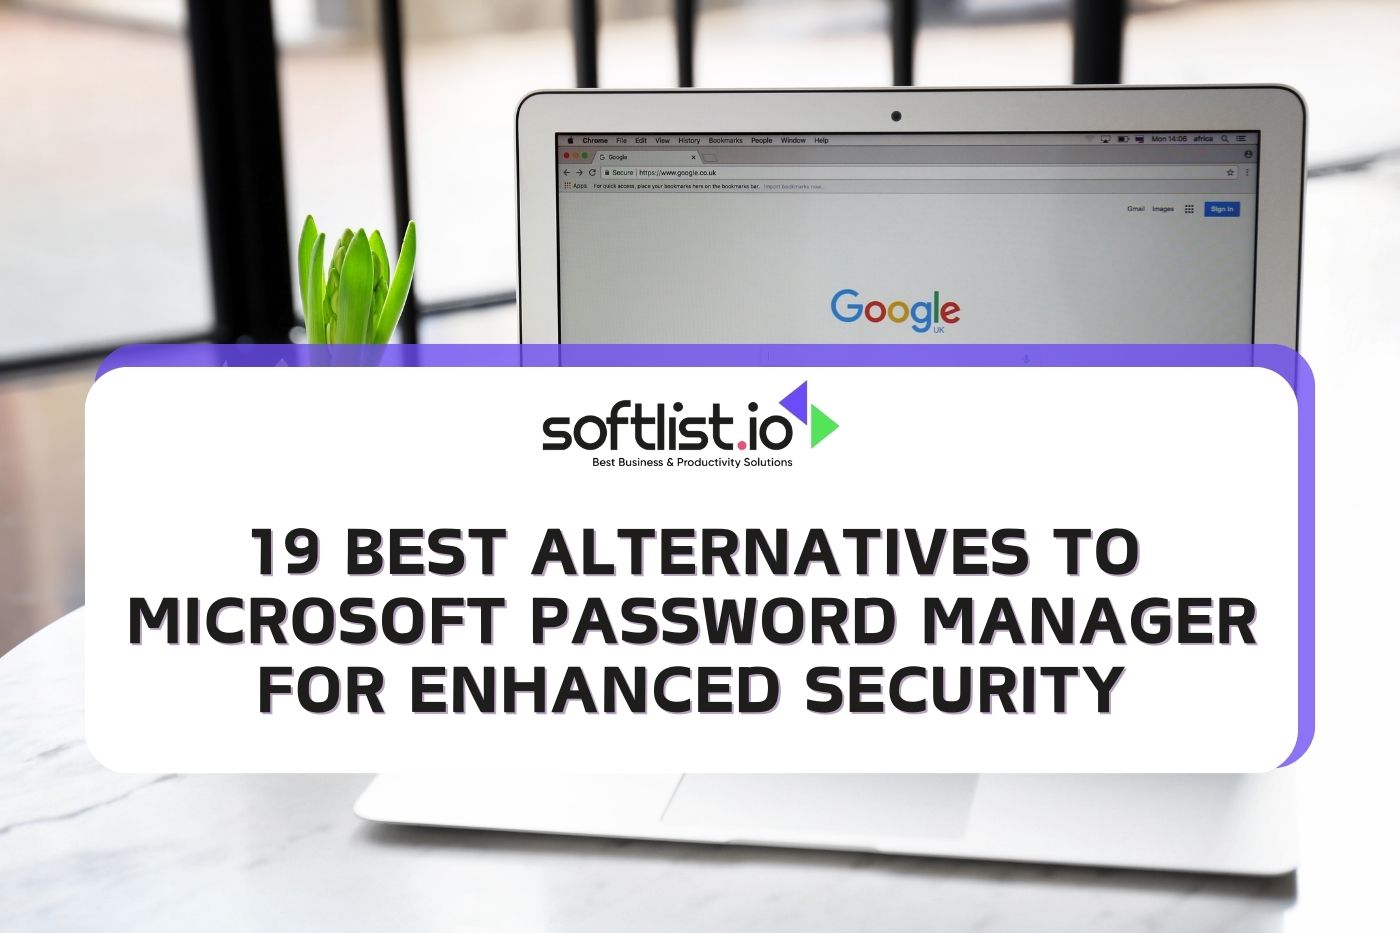 19 Best Alternatives to Microsoft Password Manager for Enhanced Security